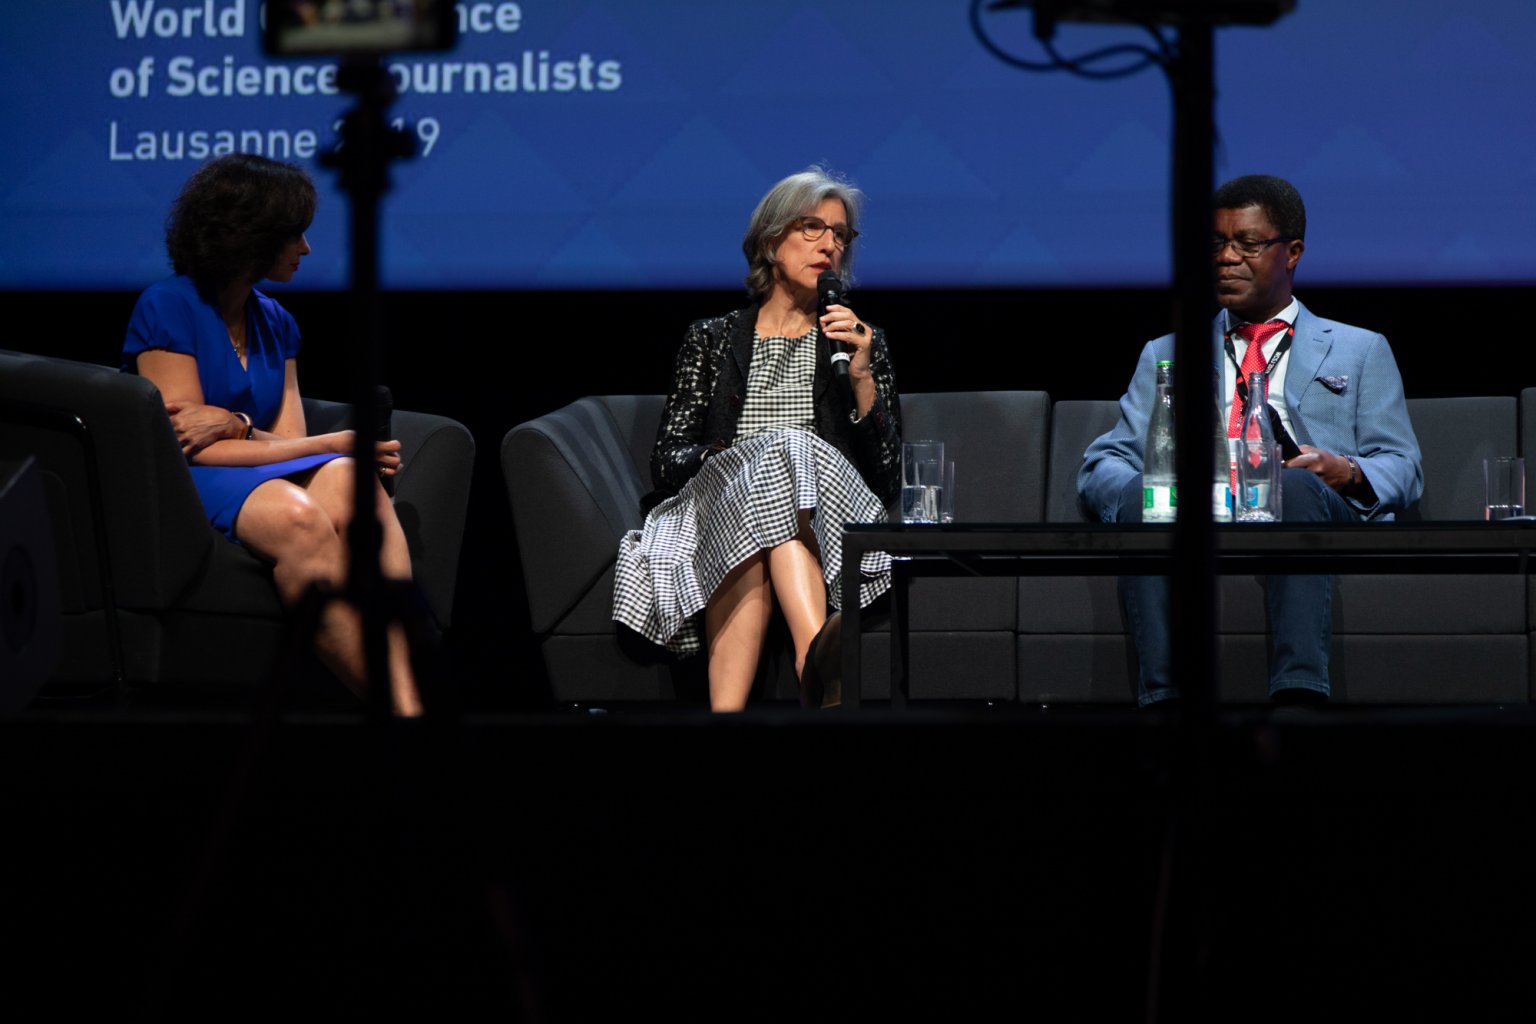 Championing science engagement and inclusivity at the World Conference of Science Journalists